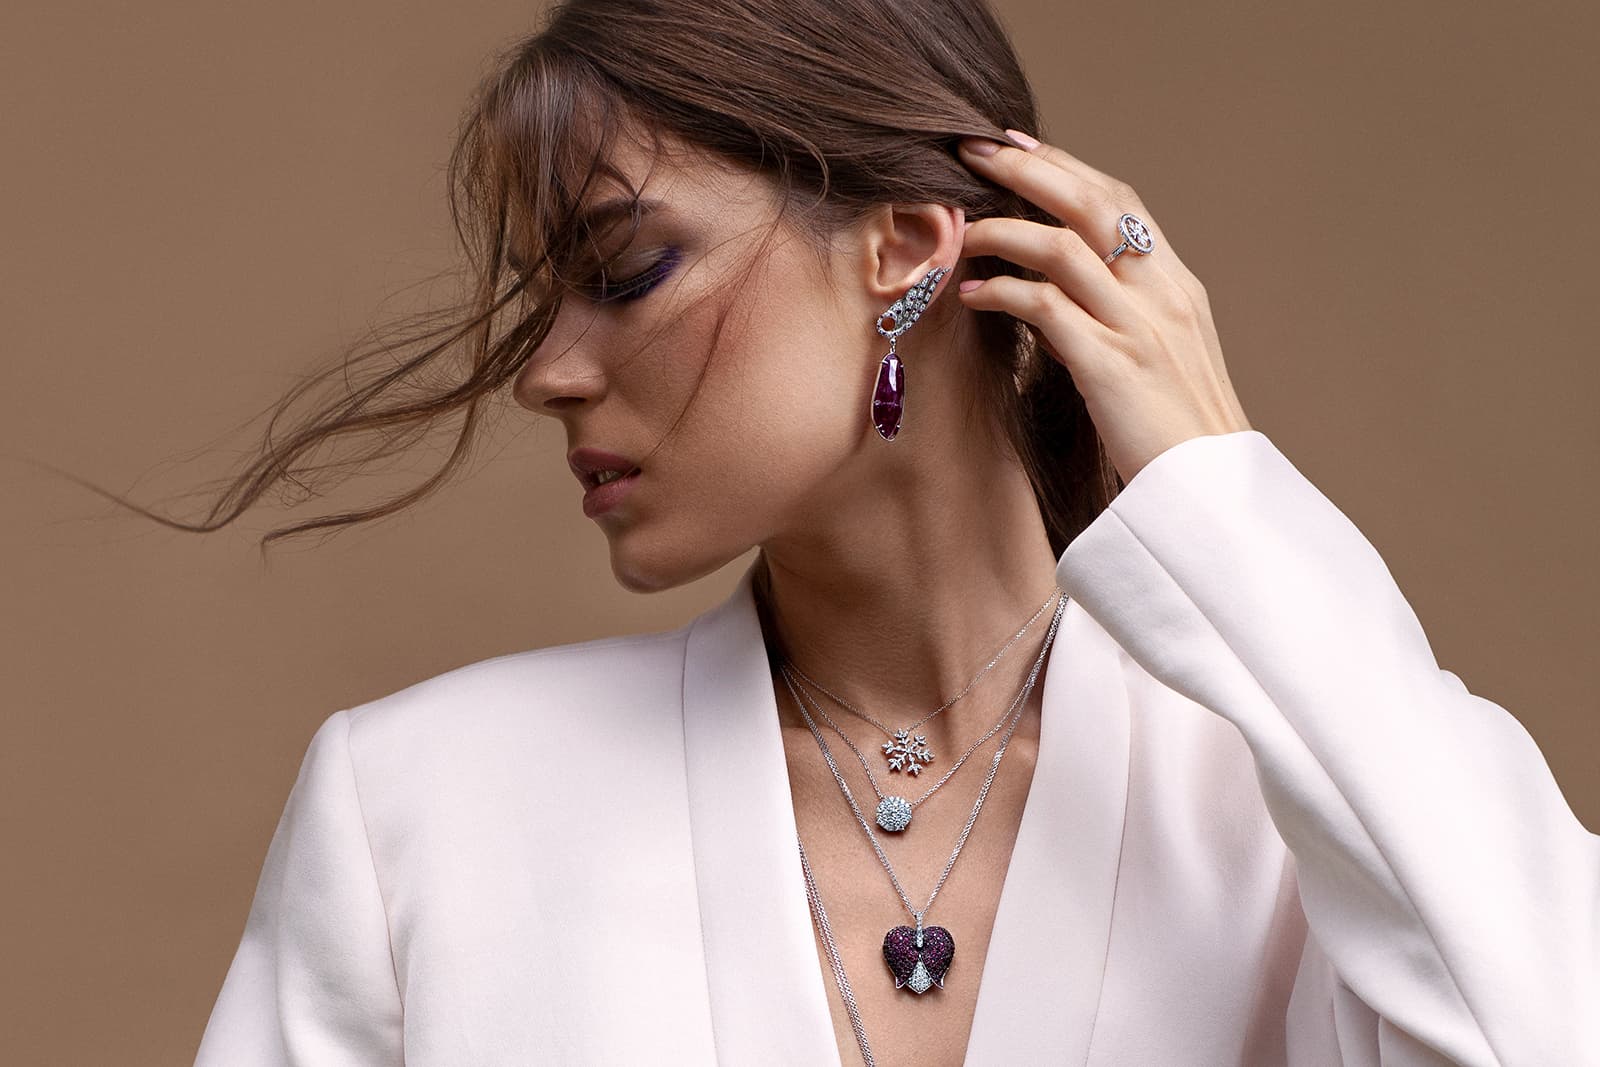 Maison Mirath jewellery including the Maple Leaf Ring with diamonds, the Wings of Love earrings set with natural ruby crystals, the Diamond Sun pendant with illusion-set diamonds and the Flowing Heart pendant with diamonds and rubies